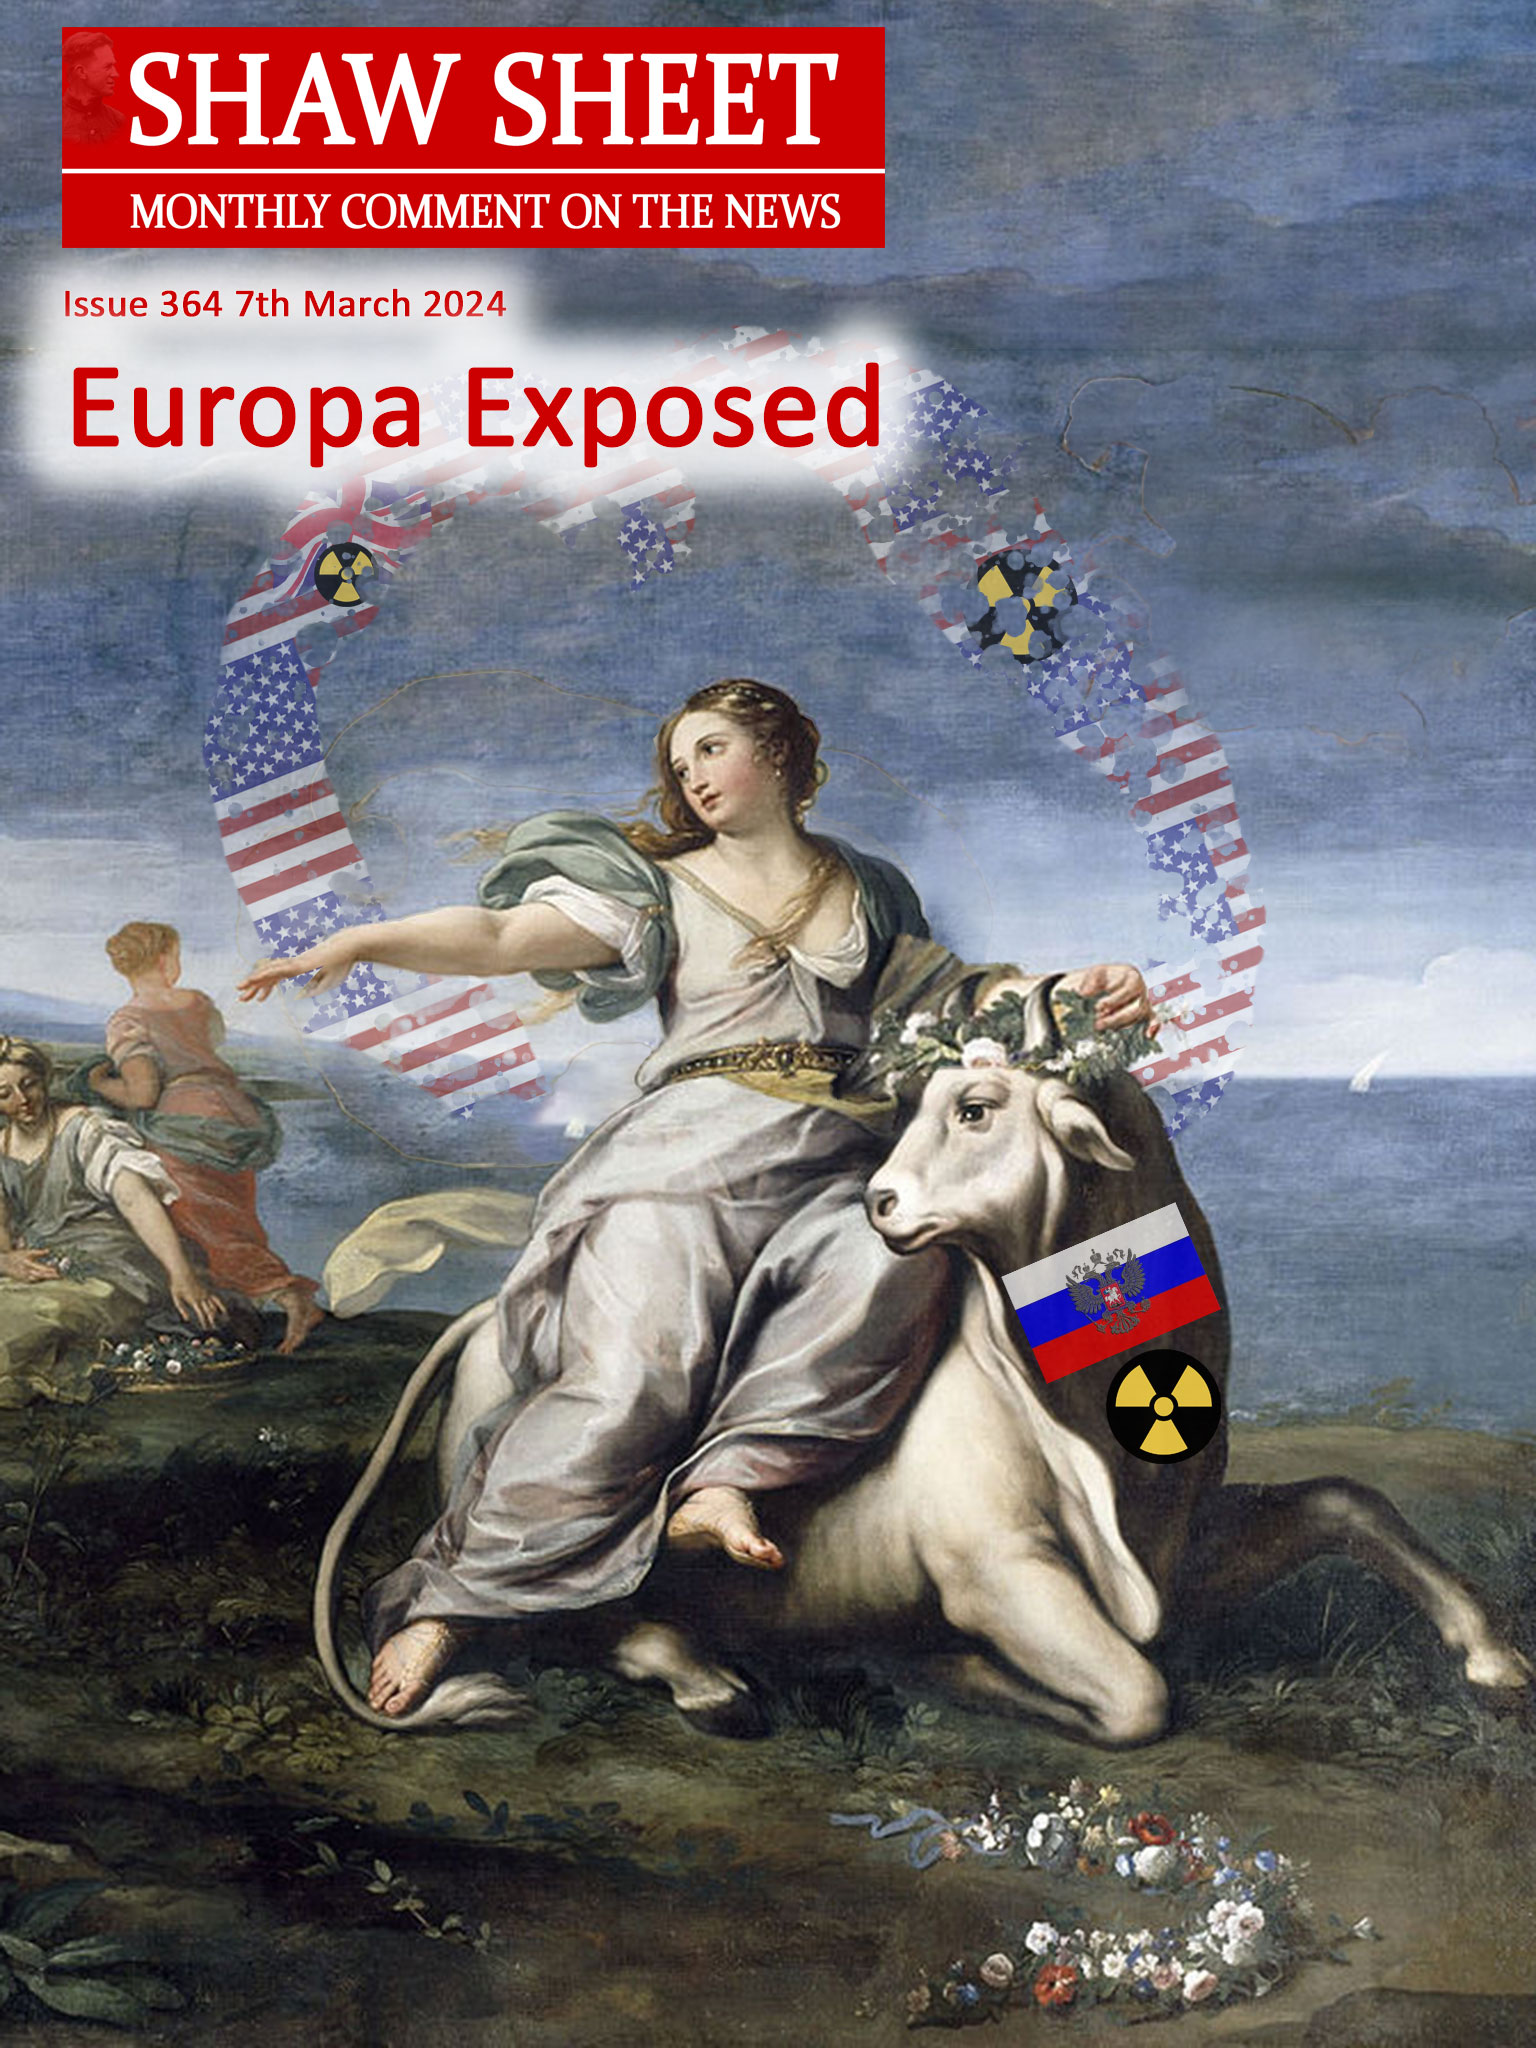 A painting of Europa riding the bull is modified to have the bull be a nuclear Russia and the veil of Europa be a tattered US flag printed scarf with nuclear symbols on it.